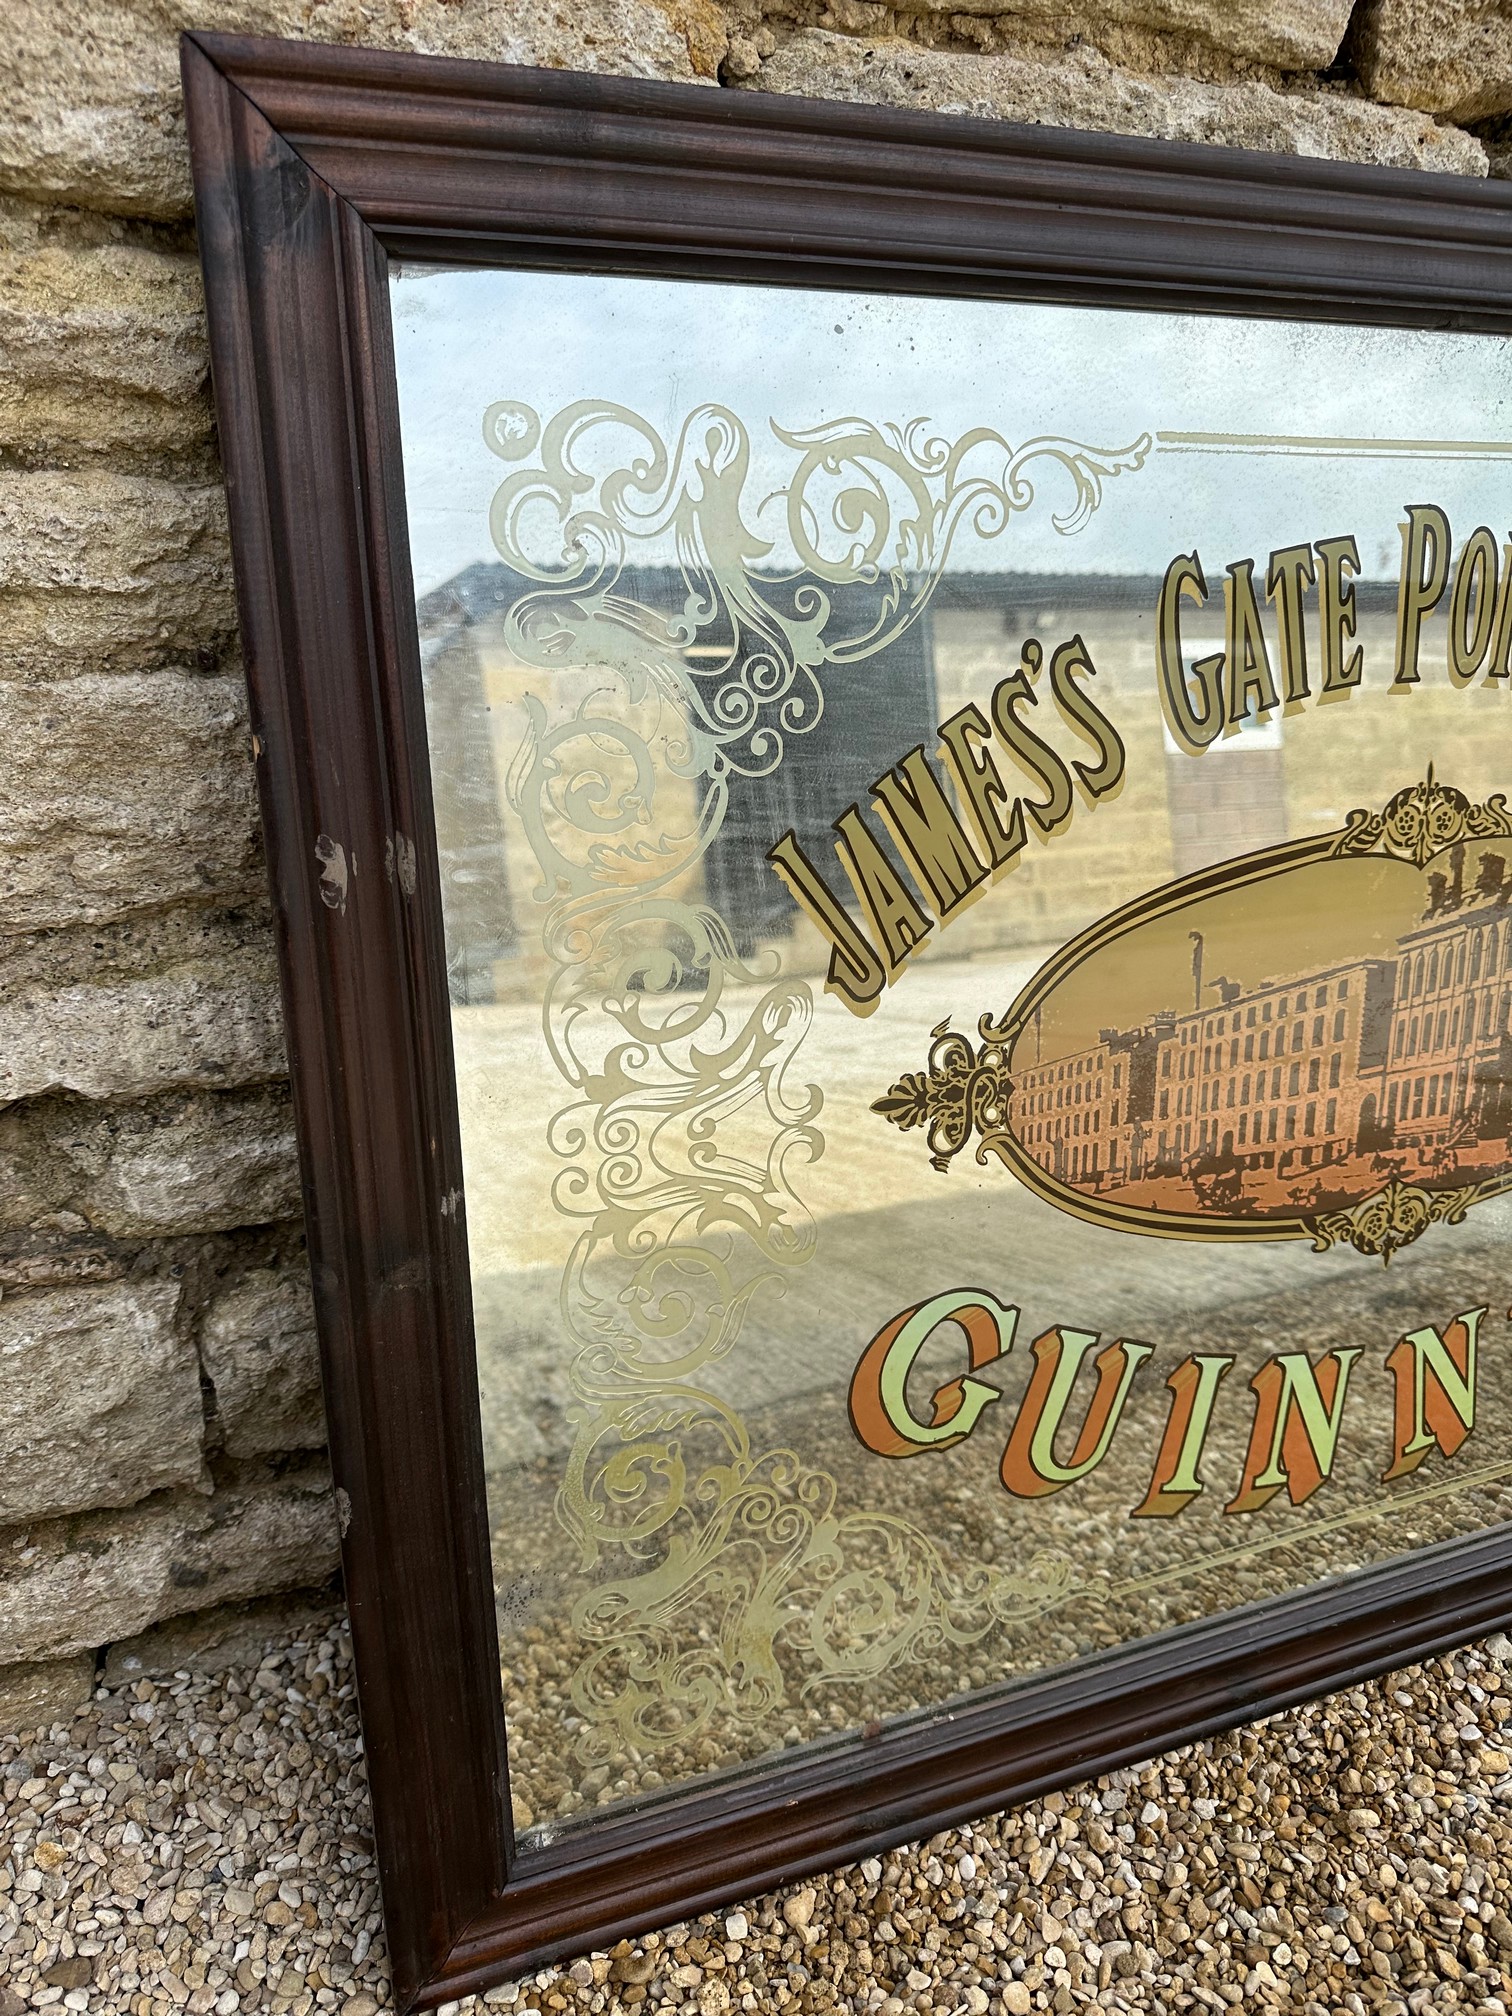 A large pub mirror advertising James's Gate Porter Brewery Guinness, 40 x 28". - Image 2 of 3